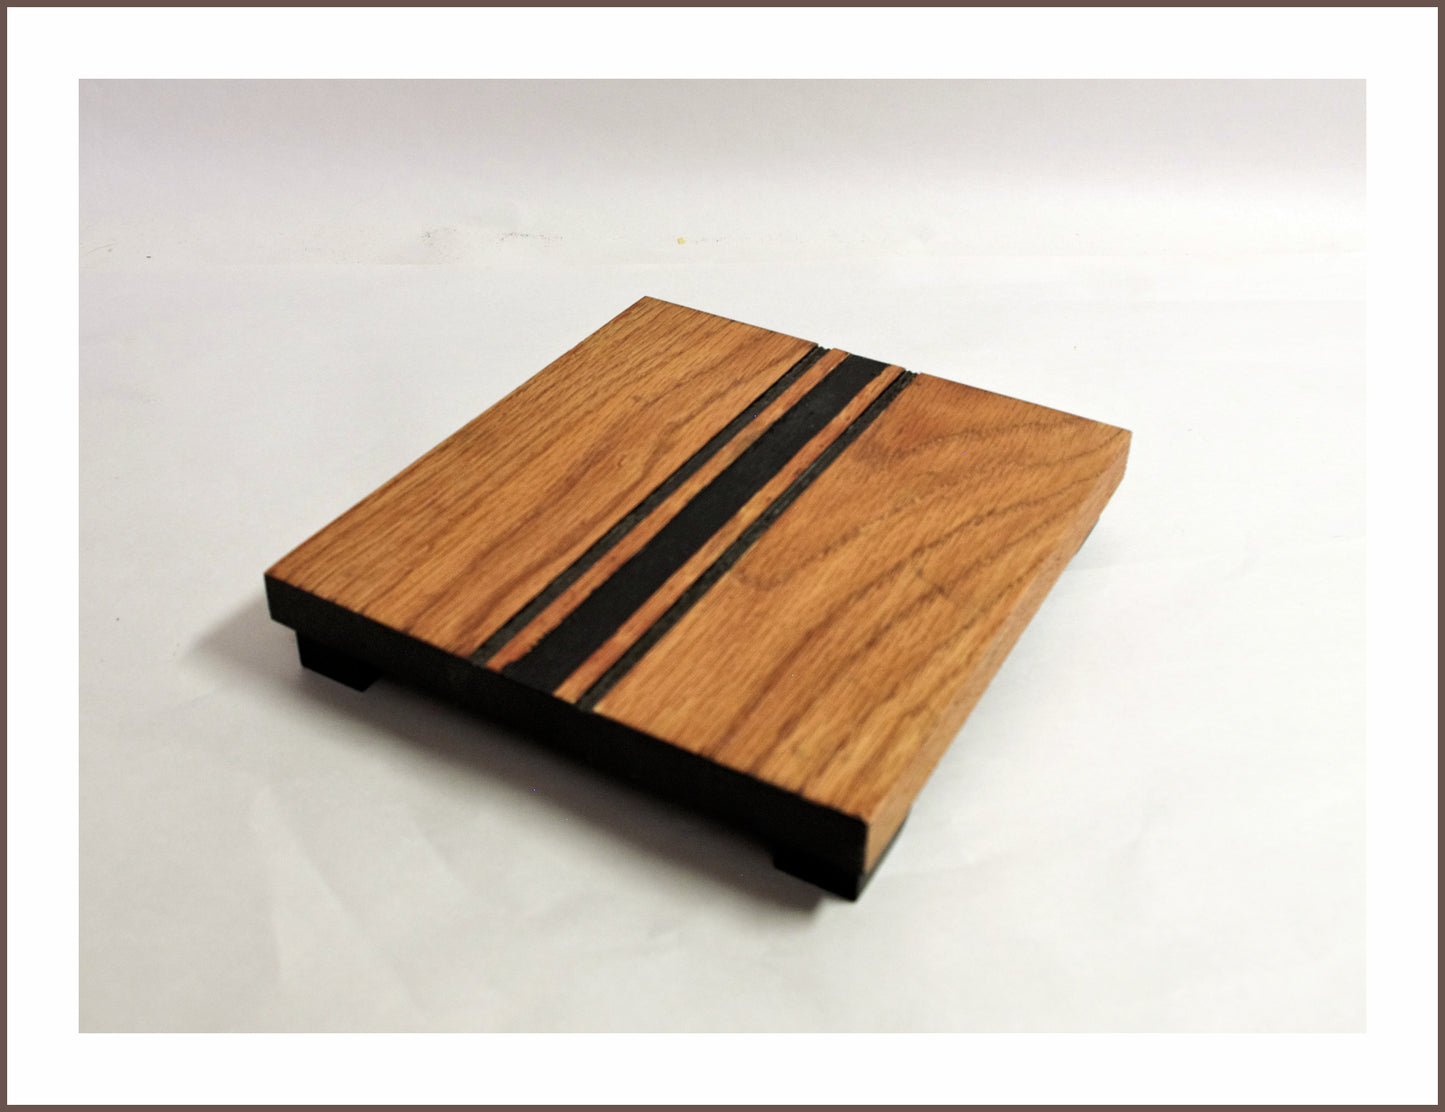 IN STOCK Collectible display stand Cherry stain w/ black racing stripe - 7 inches long, 6 1/4 inches wide, 1 1/8 inches tall